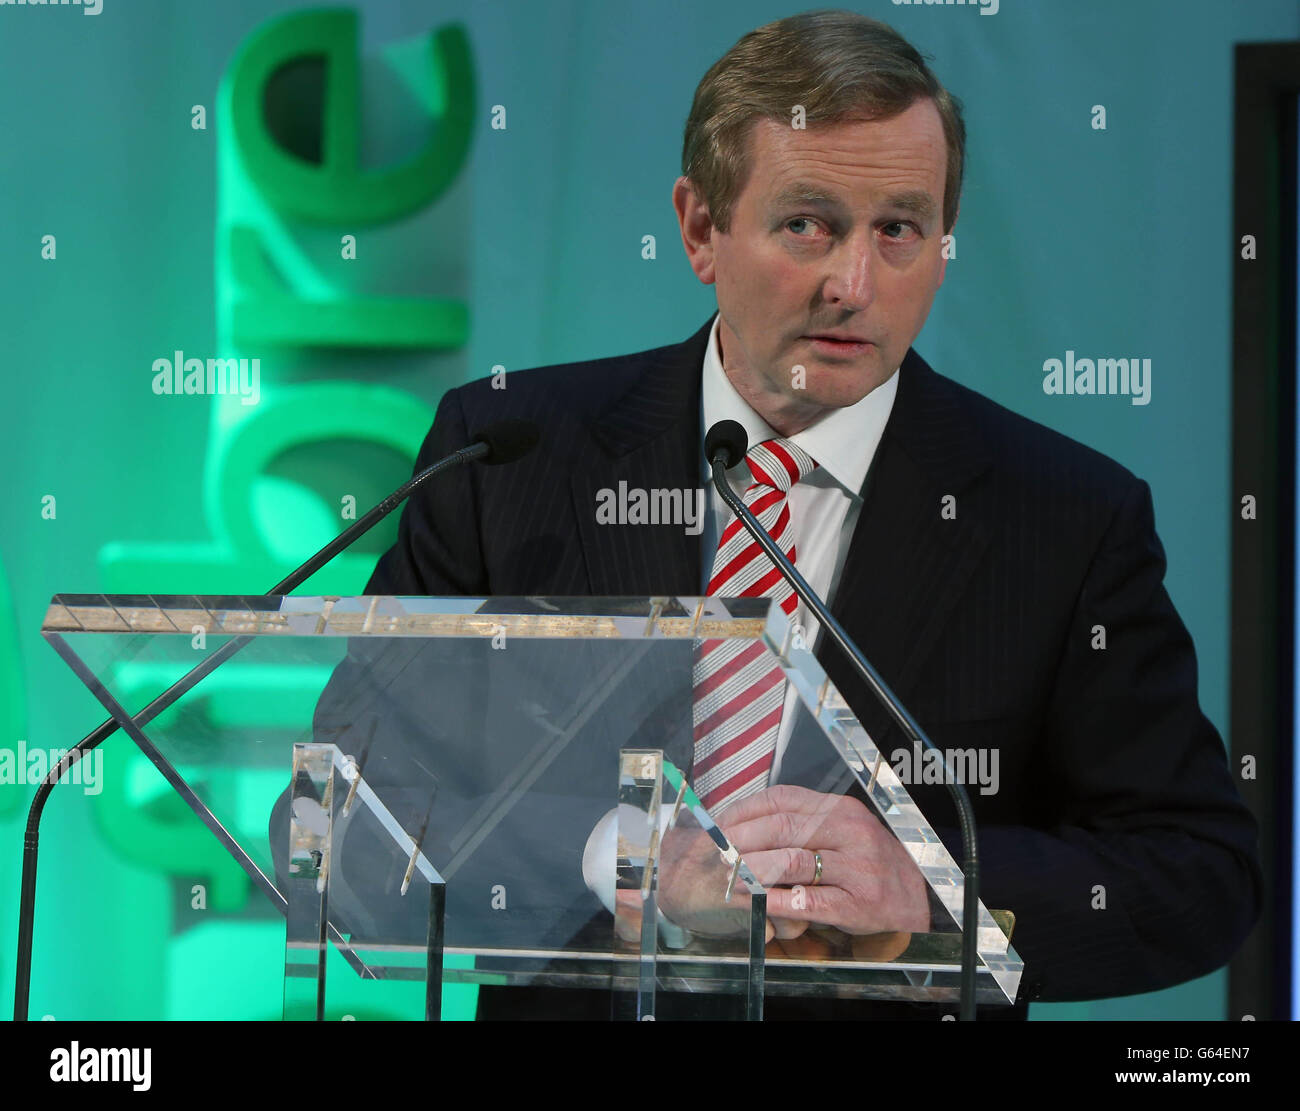 Taoiseach Enda Kenny talks to the media as he attends the official launch of Eircom's fibre network and eFibre products at the companies head quarters at Heuston South Quarter, Dublin. Stock Photo